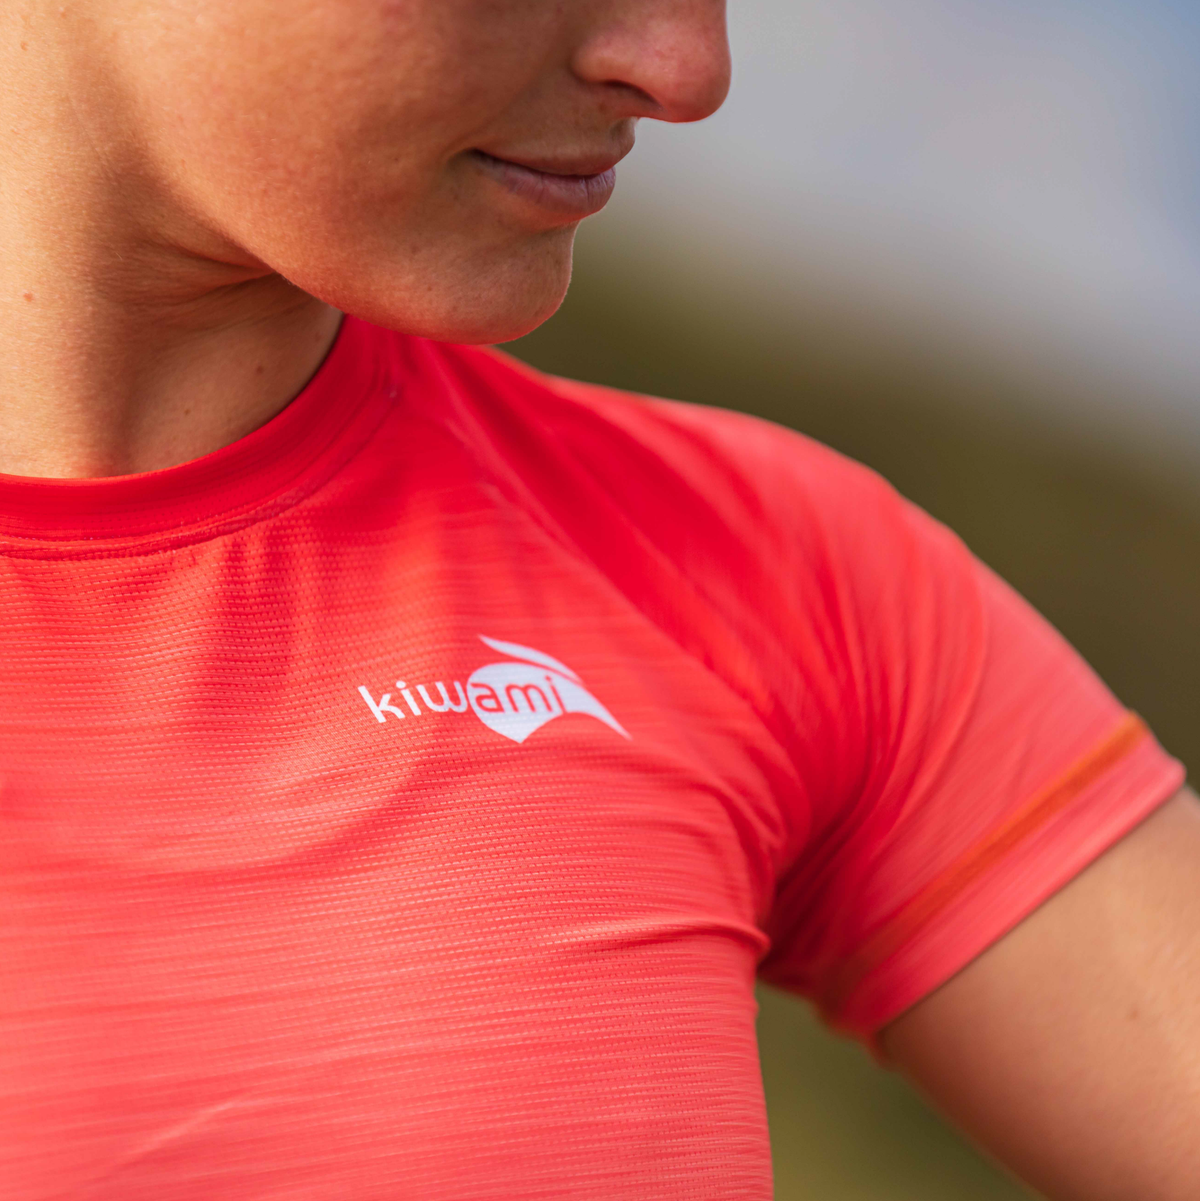 Trail running performance clothing for women